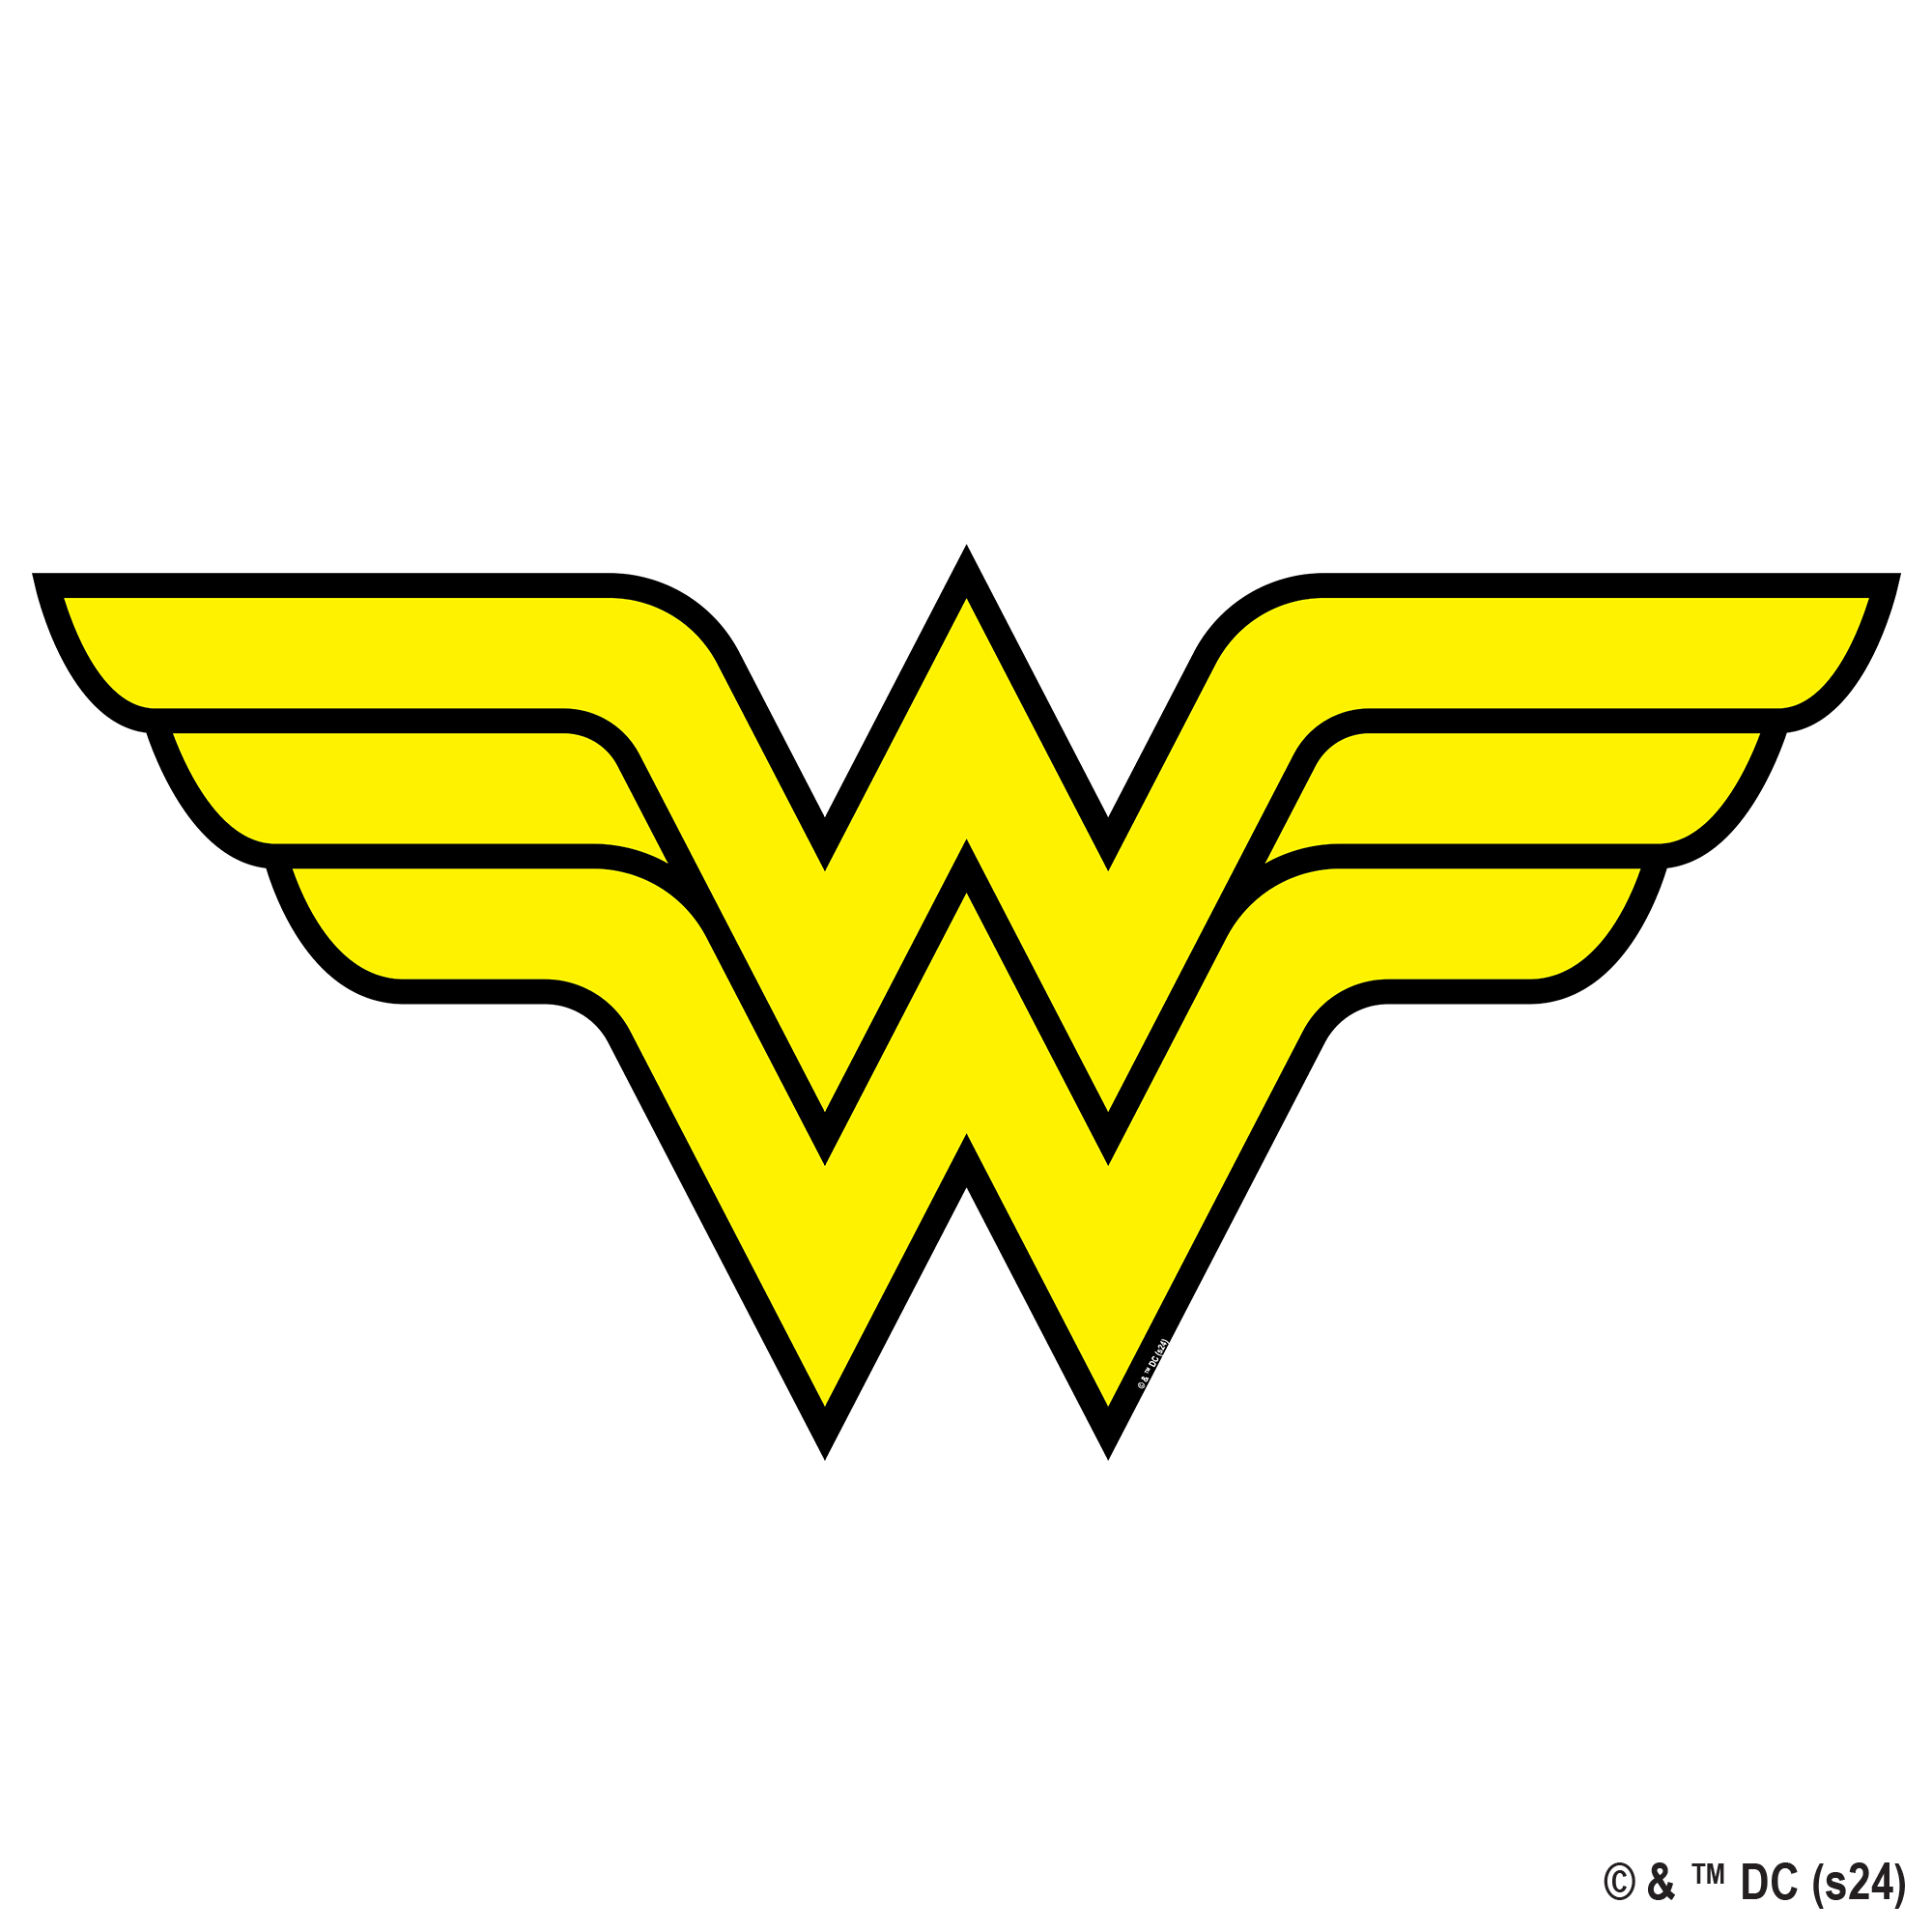 Animal Jigsaw Puzzle > Wooden Jigsaw Puzzle > Jigsaw Puzzle Wonder Women Logo Wooden Jigsaw Puzzle